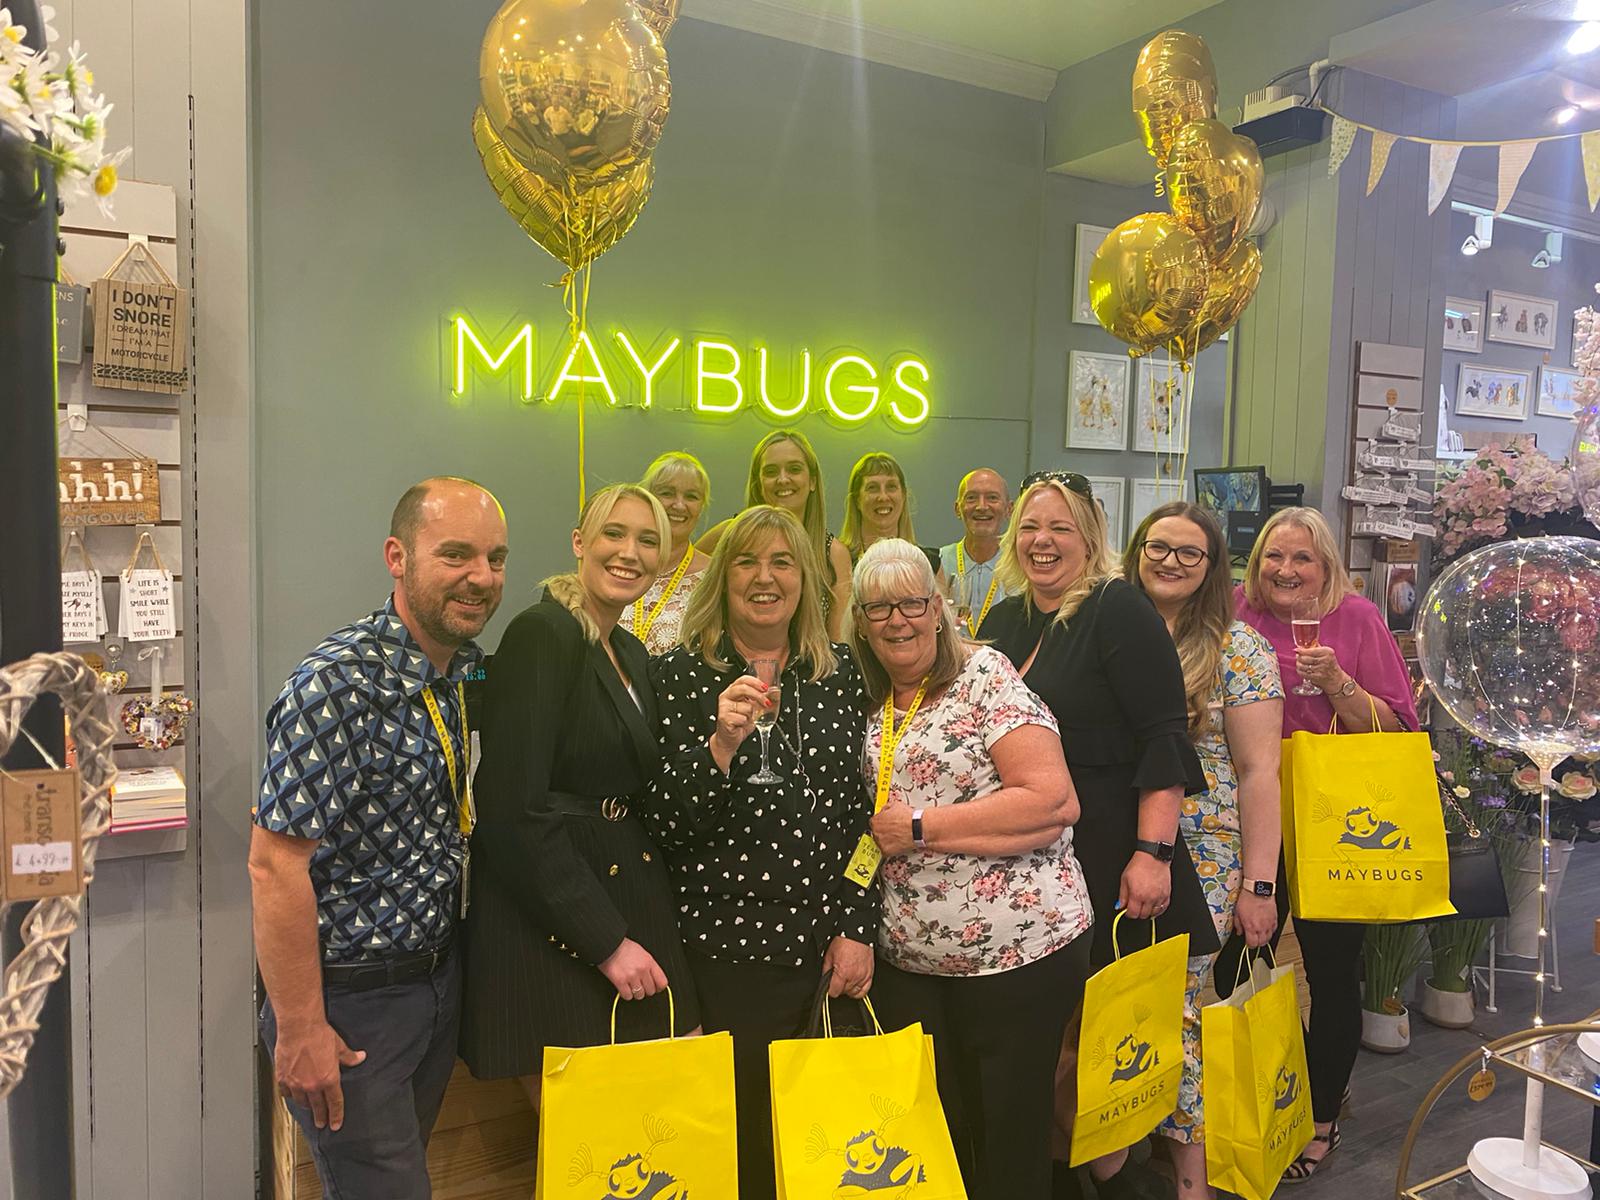 Above: The Maybugs’ team is delighted at reaching the finals in two awards programmes